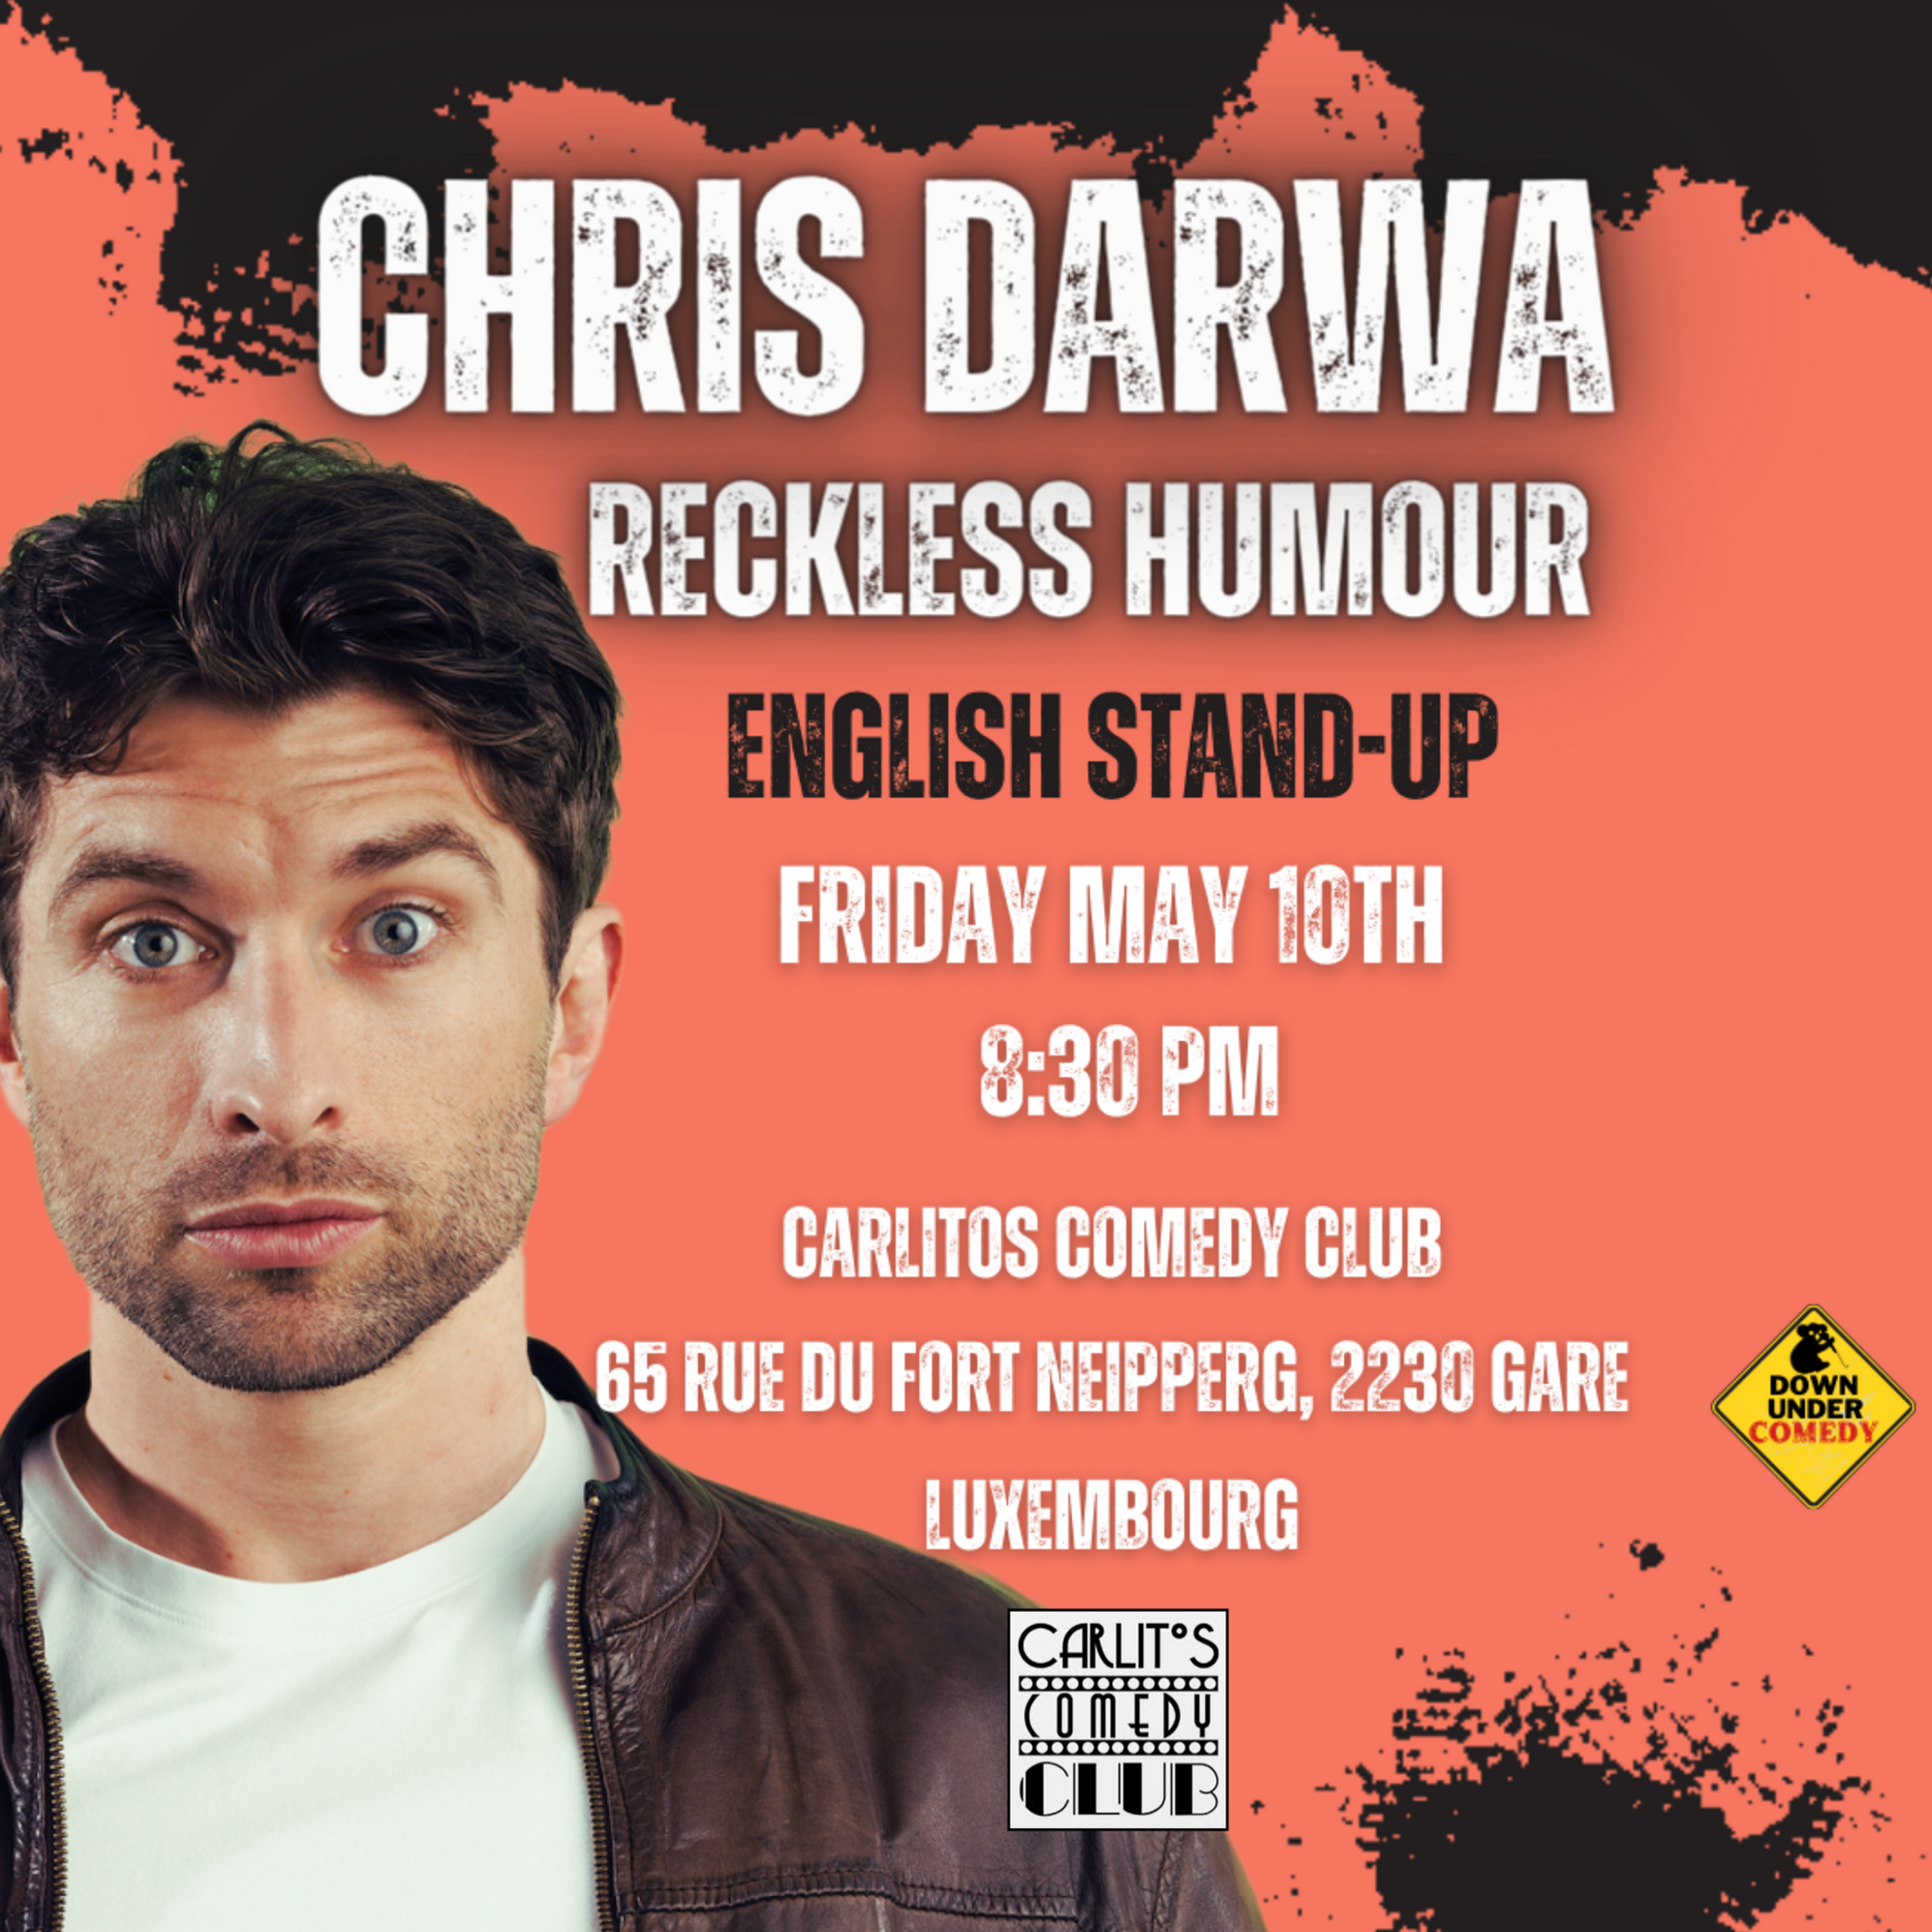 Chris Darwa - Reckless Humor - English Stand-up comedy